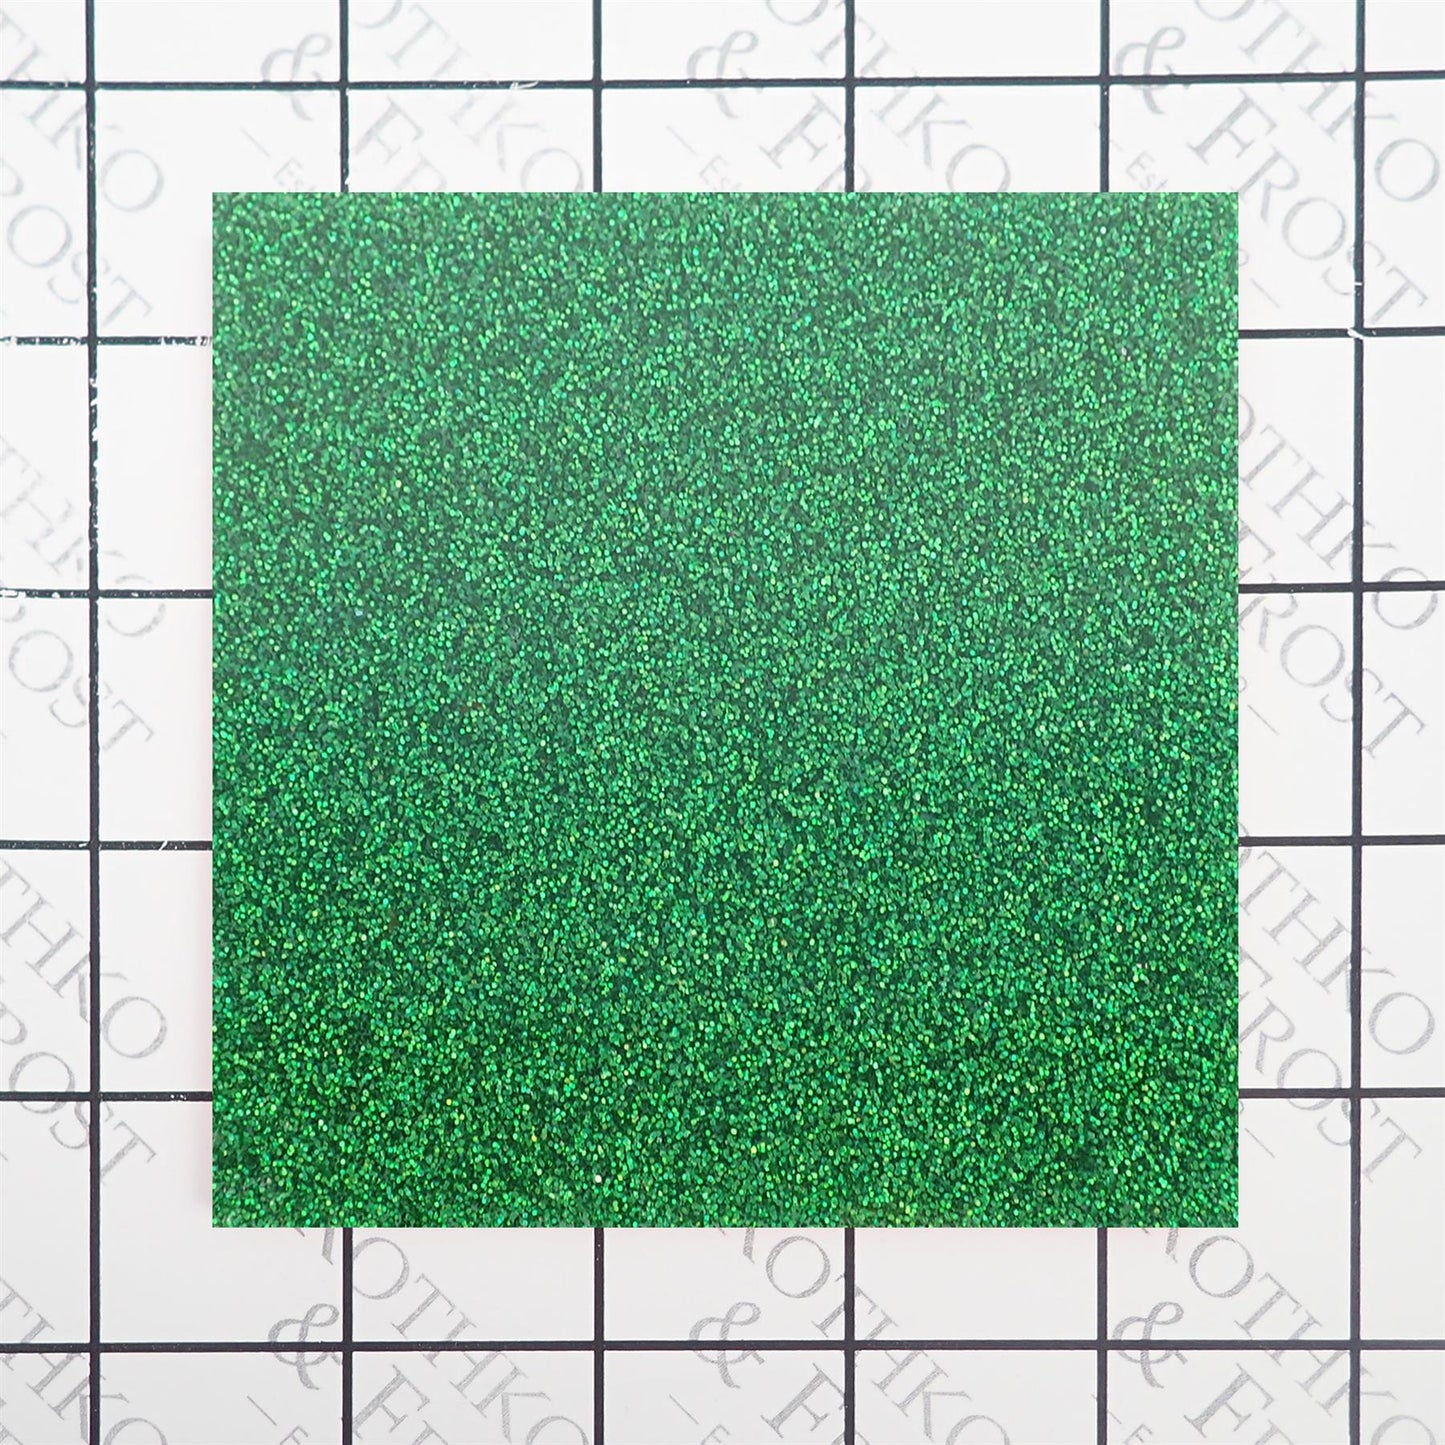 Incudo Grass Green 2-Sided Holographic Glitter Acrylic Sheet - 400x300x3mm (15.7x11.81x0.12")